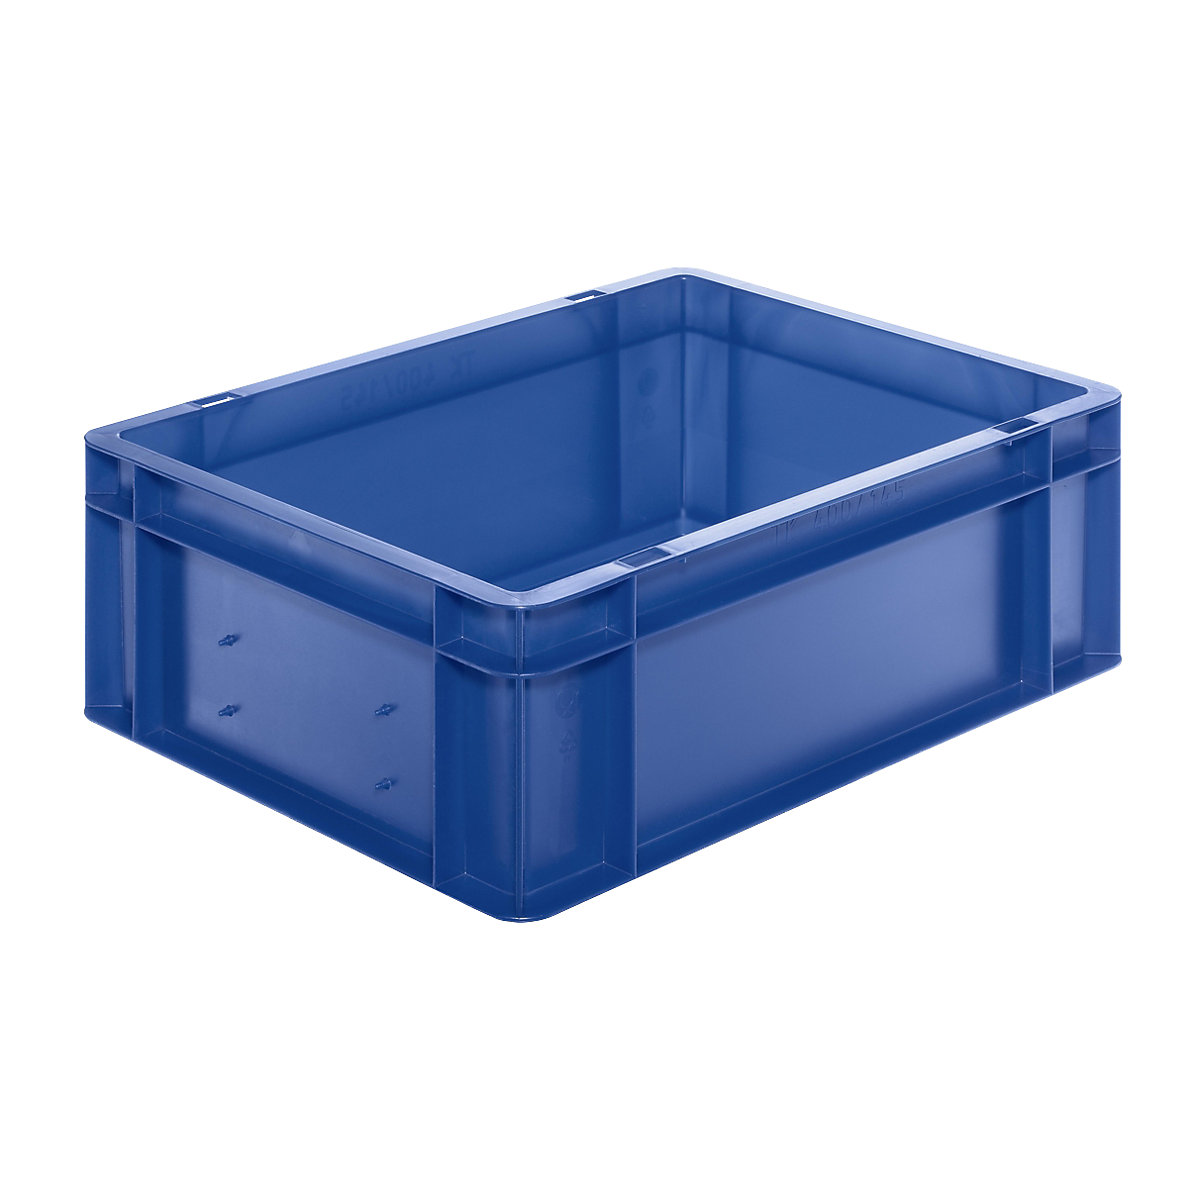 Euro stacking container, closed walls and base, LxWxH 400 x 300 x 145 mm, blue, pack of 5-7